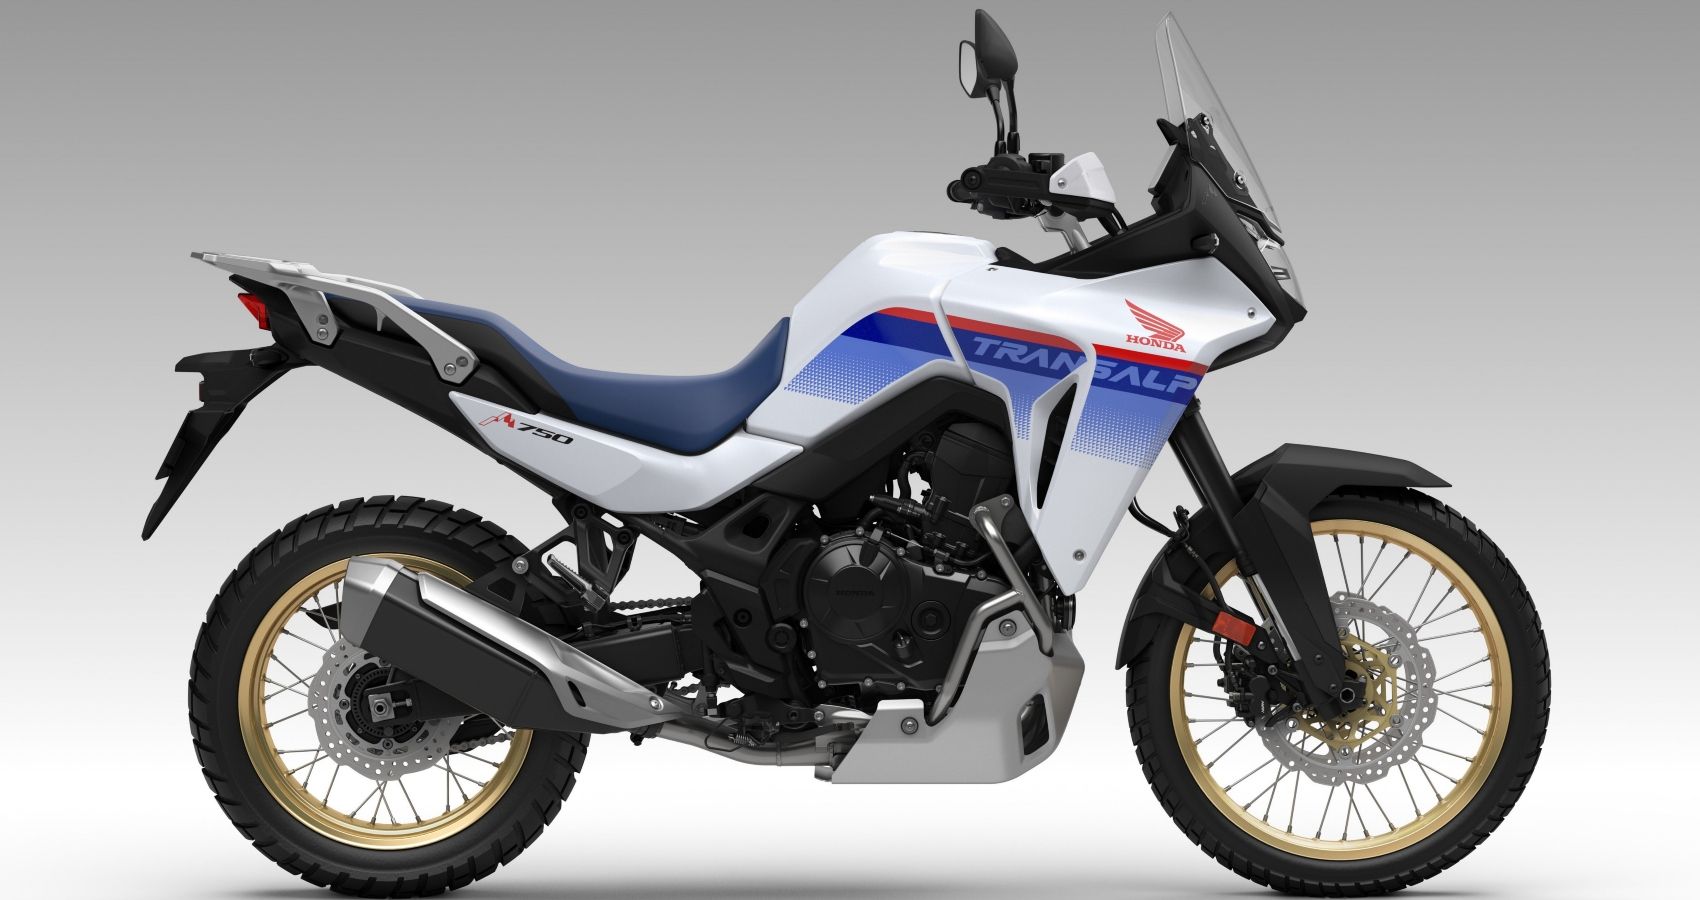 The New Honda XL750 Transalp Is More Than A ScaledDown Africa Twin